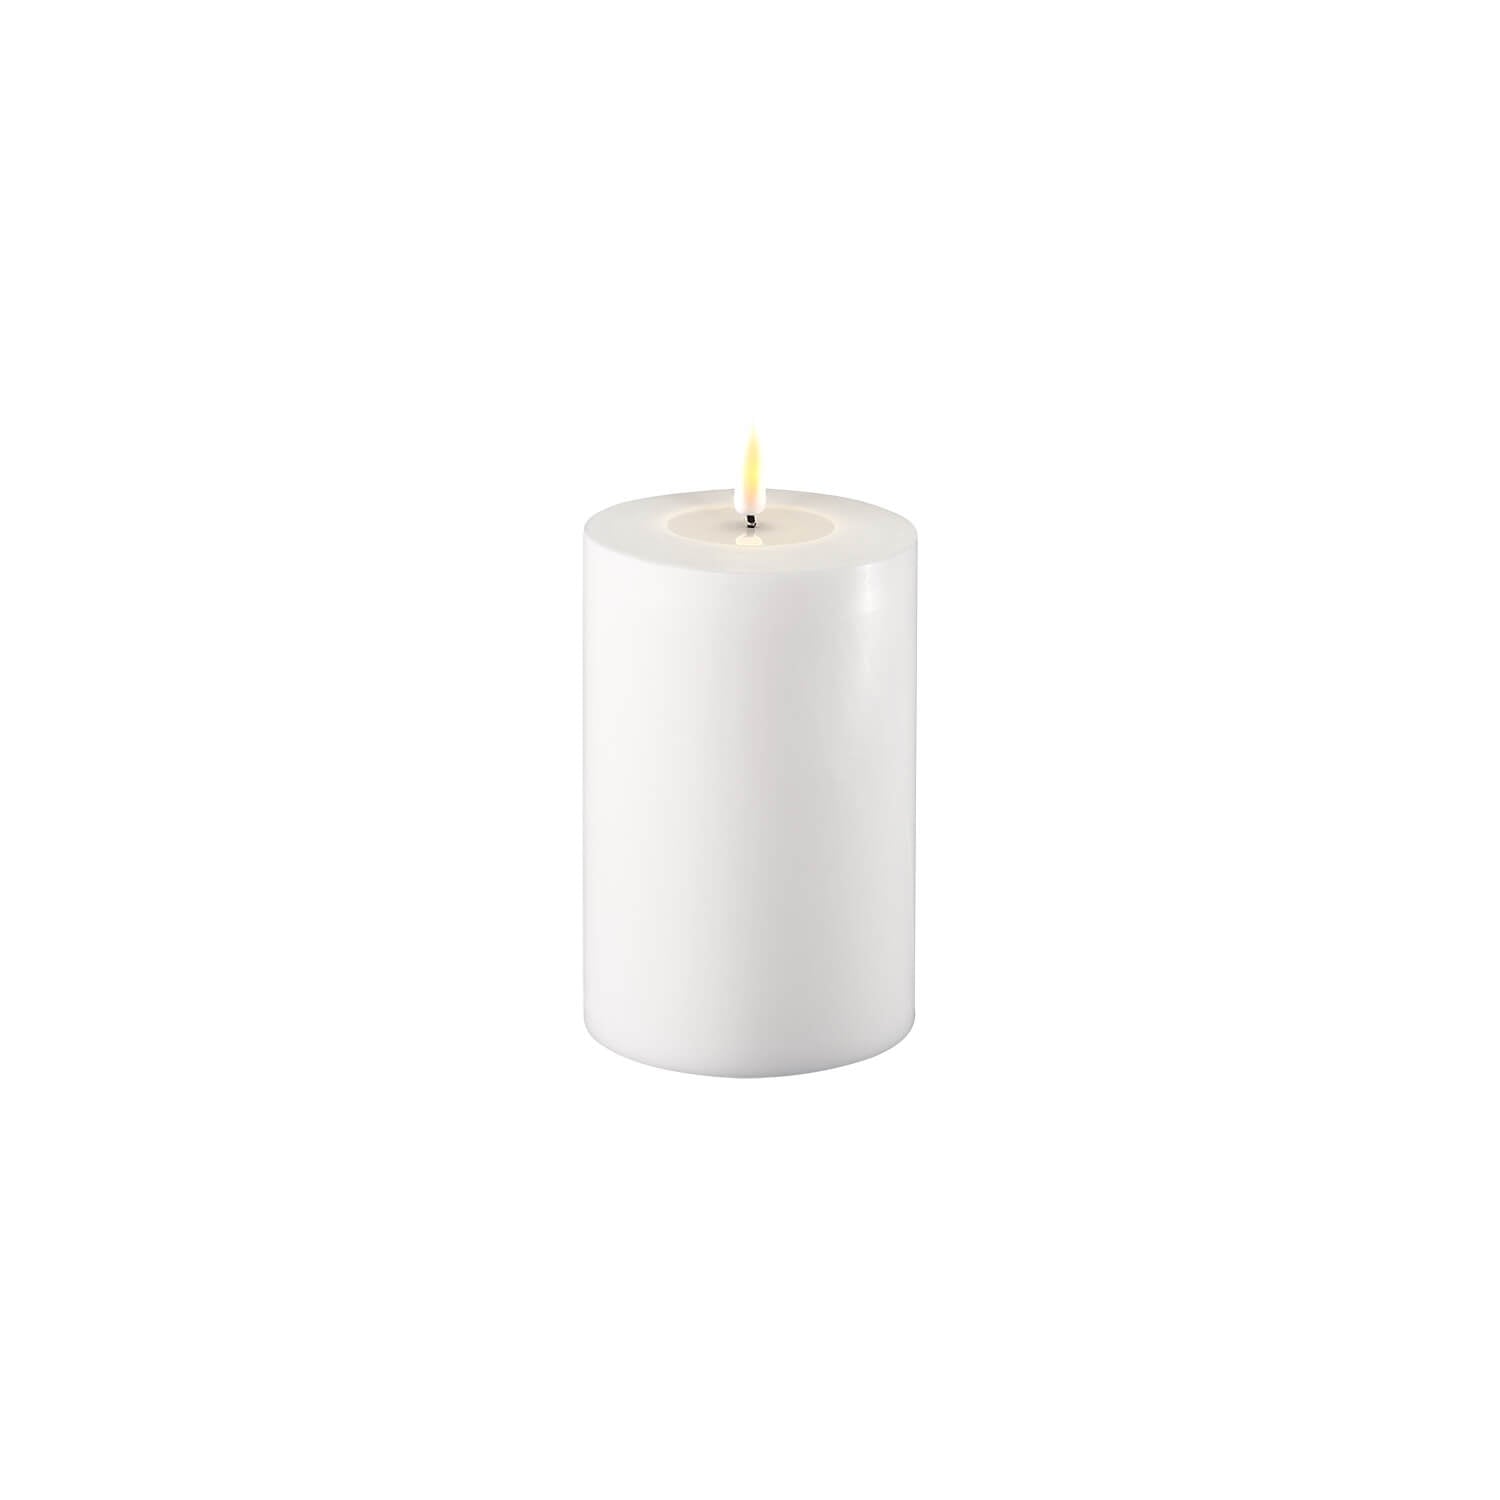 The Home Collection Deluxe LED Candle 10cm x 15cm - White 1 Shaws Department Stores